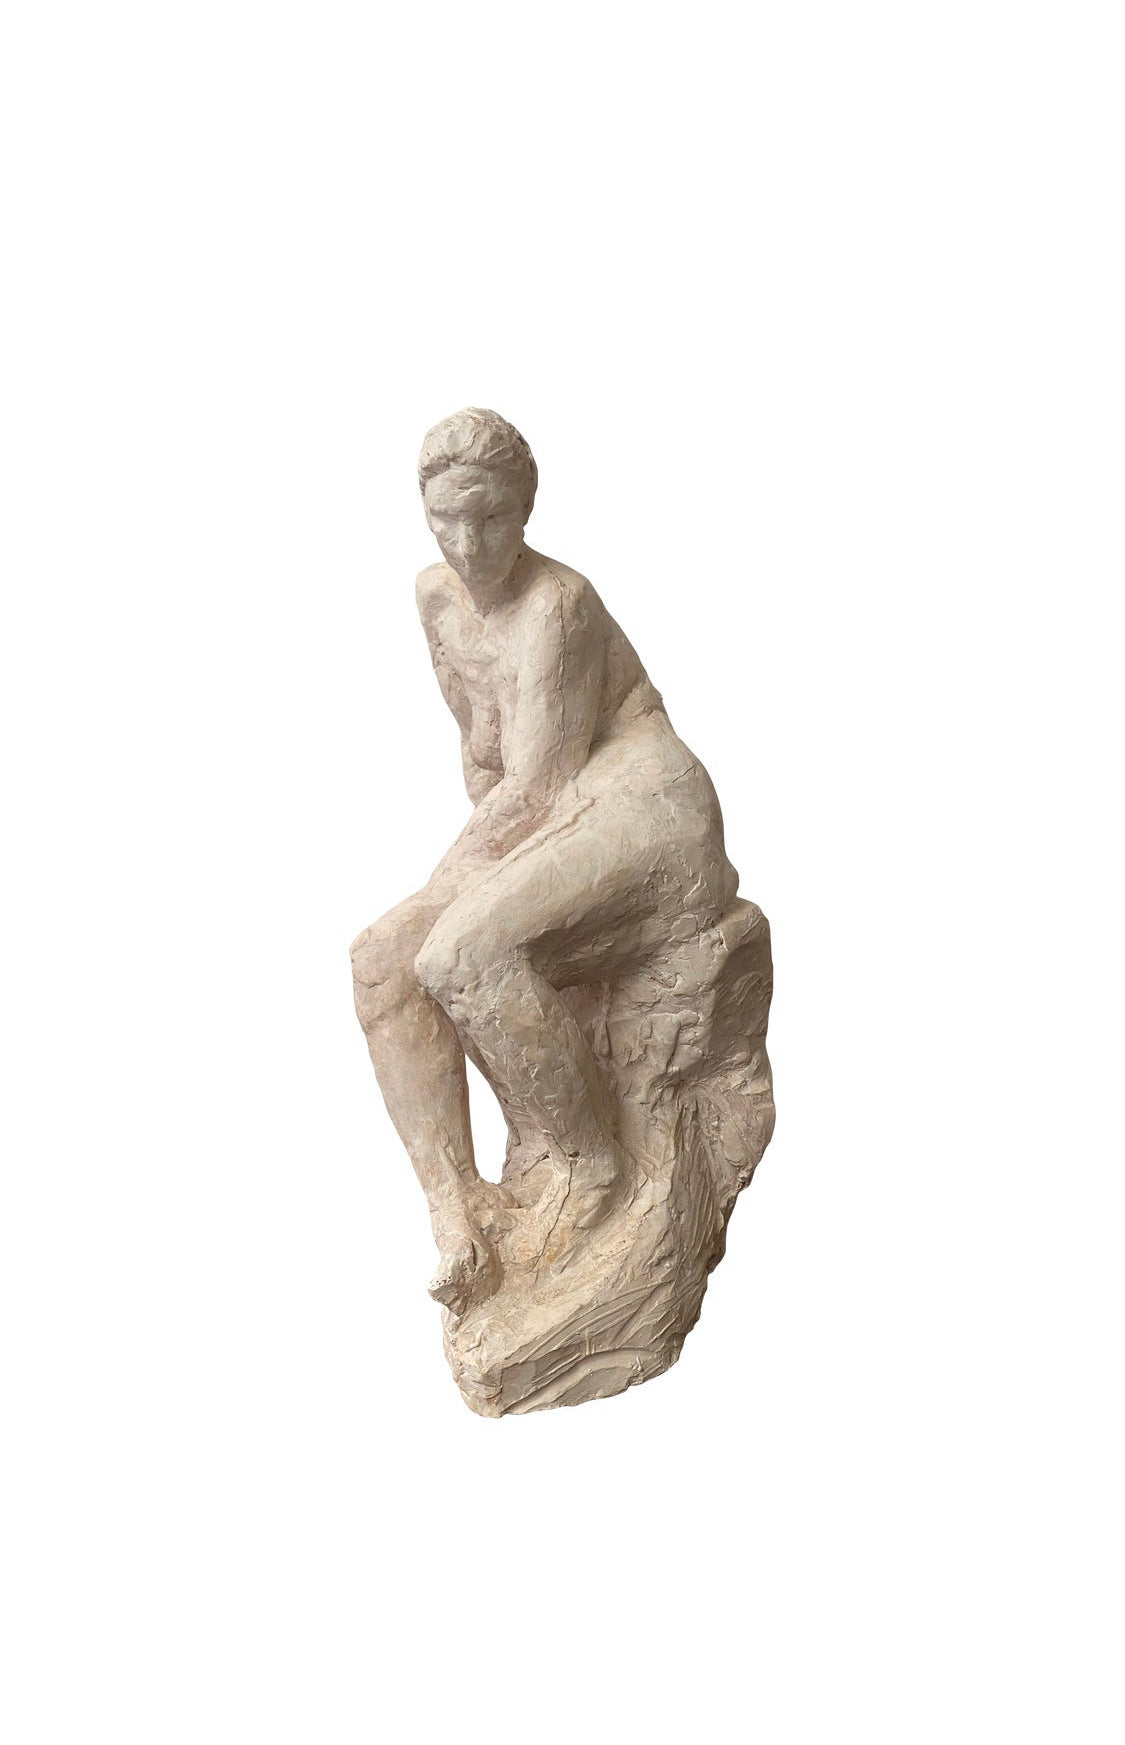 Seated Nude Woman Figure in Plaster